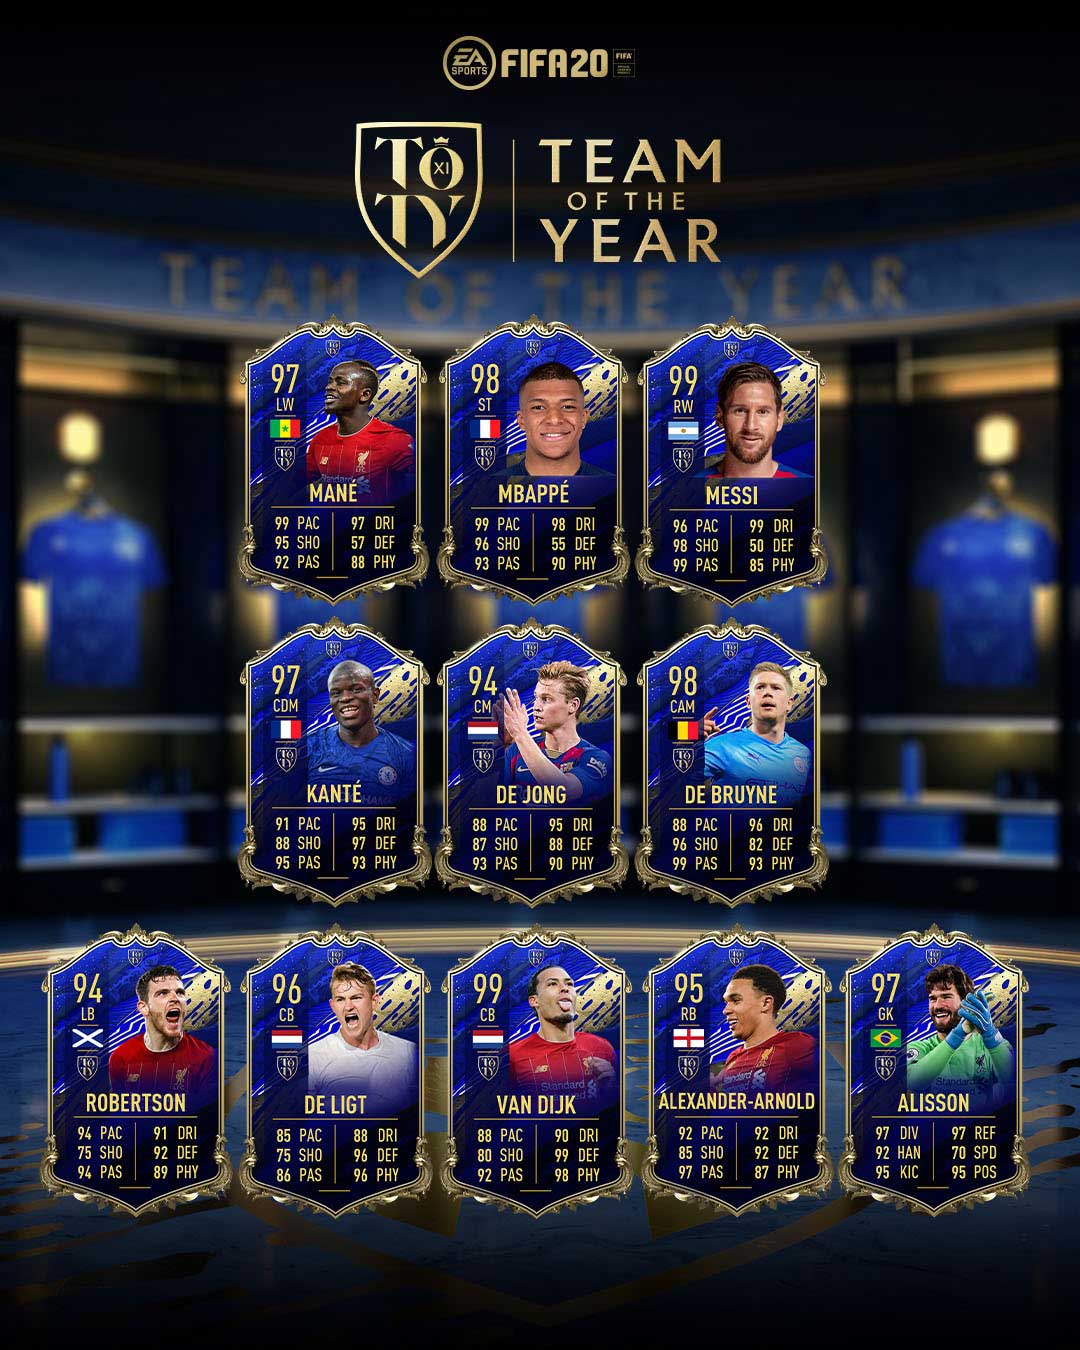 FIFA 20 Team of the Year - The Best Players of 2019